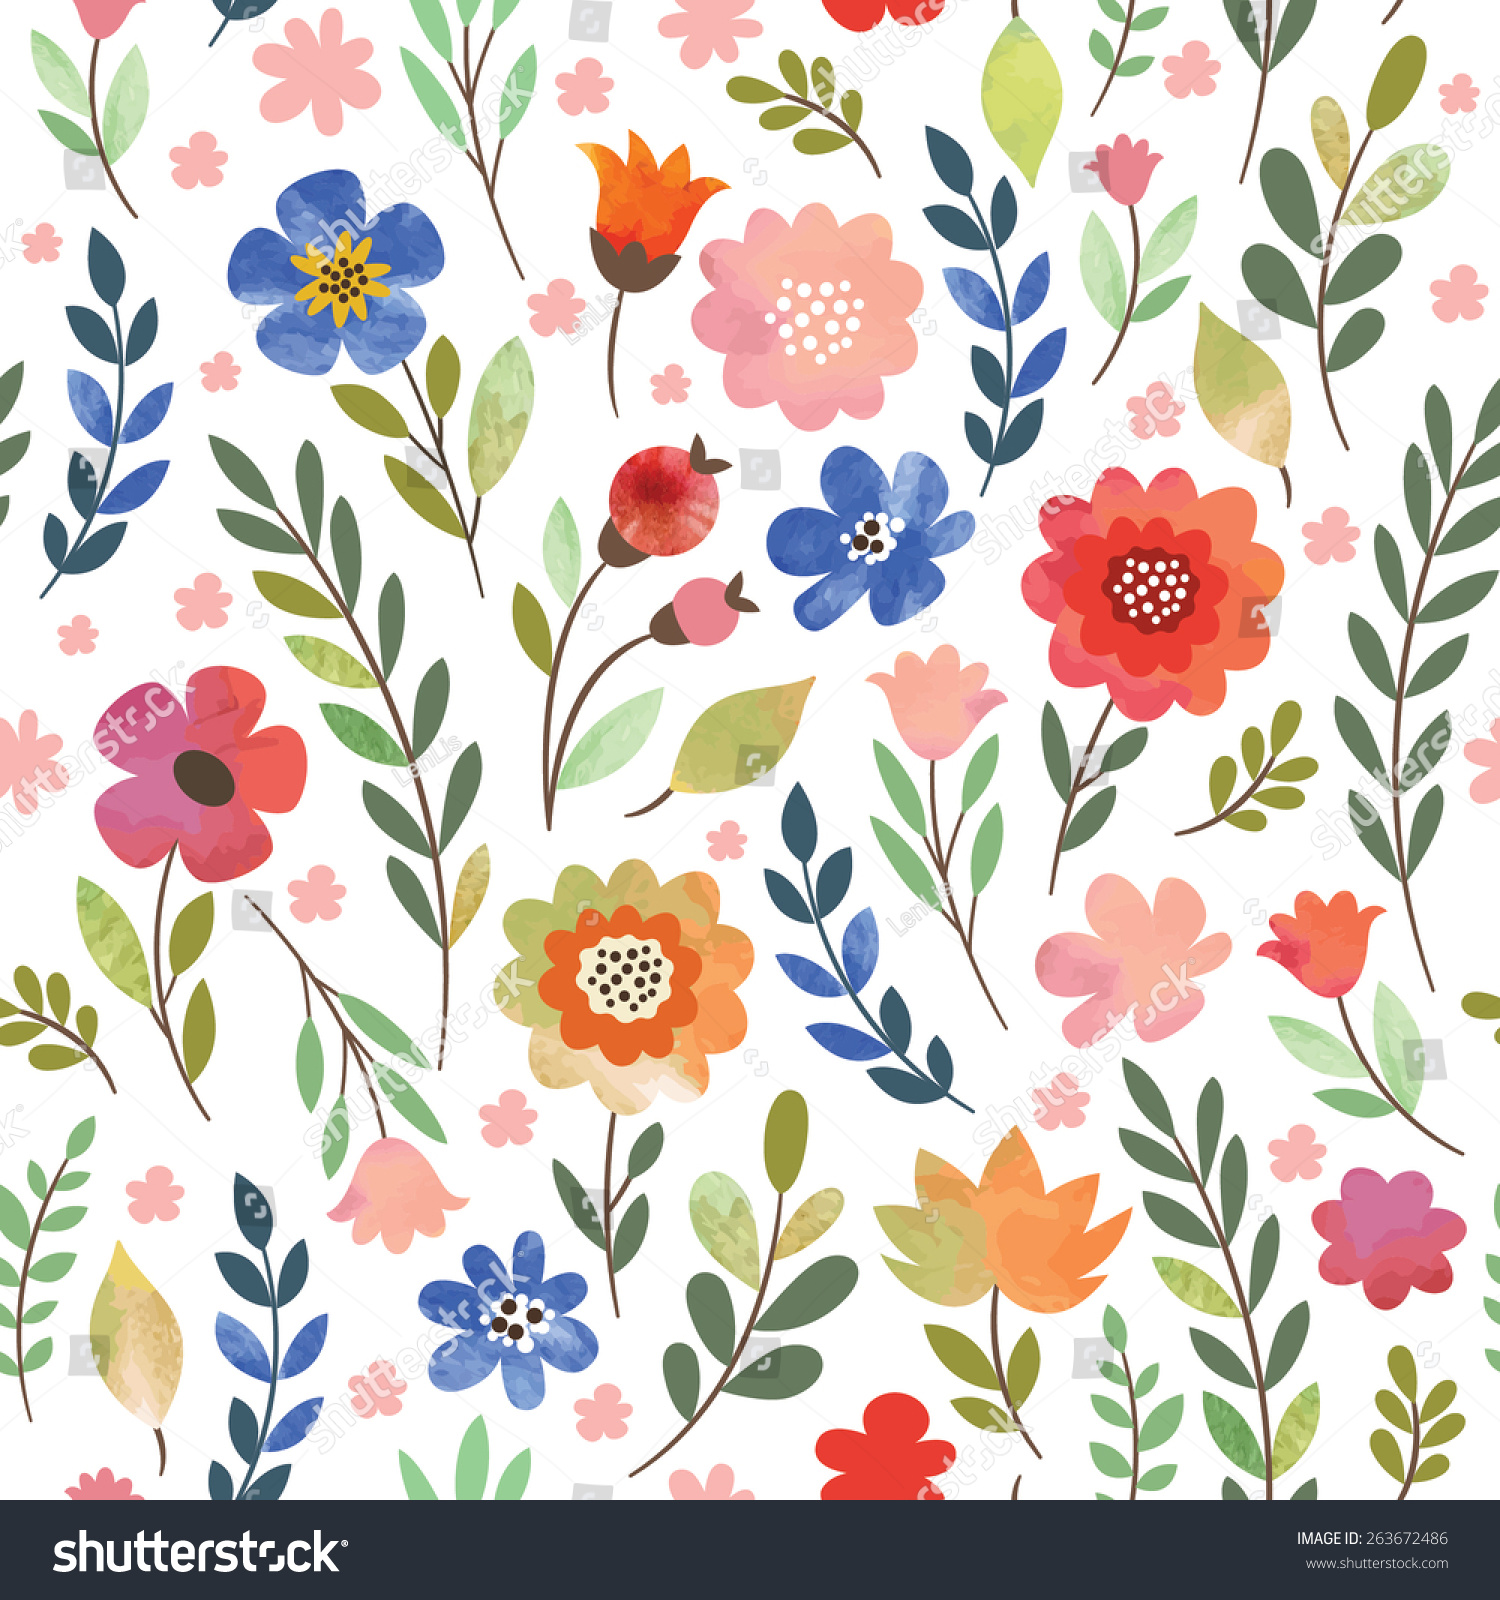 Floral Seamless Pattern Watercolor Flowers Stock Vector (Royalty Free ...